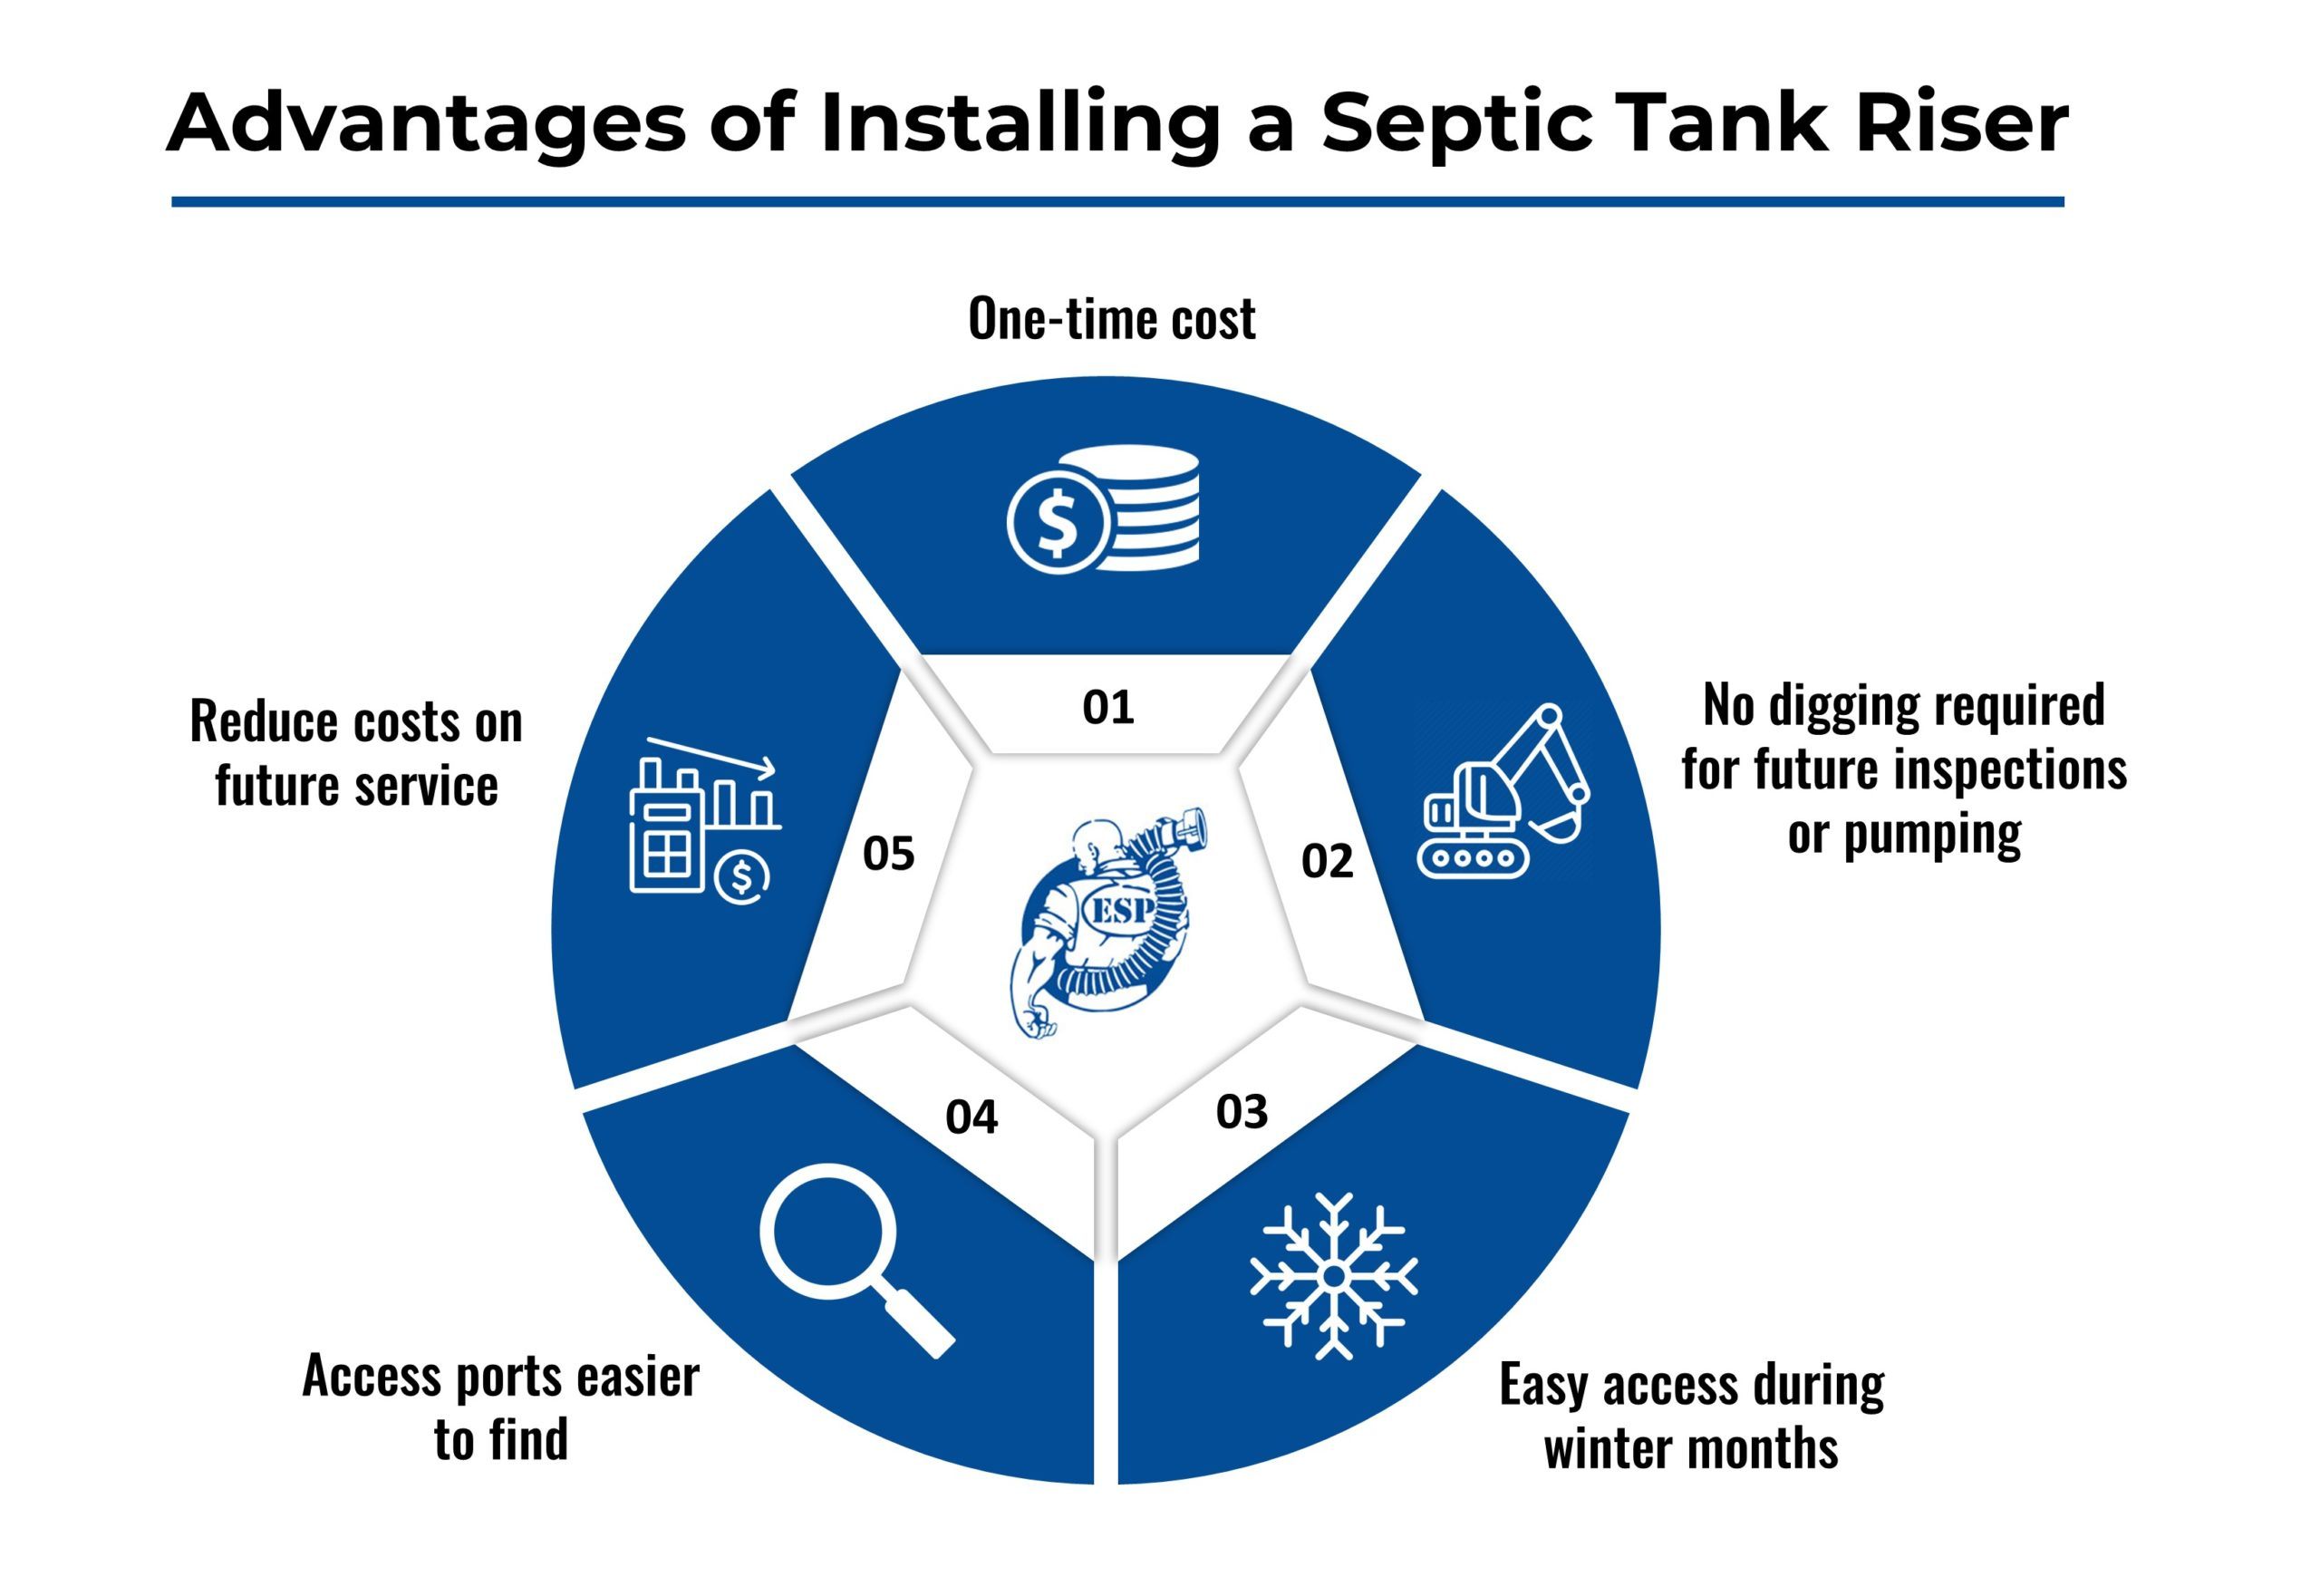 Pros and Cons of Septic Tank Risers